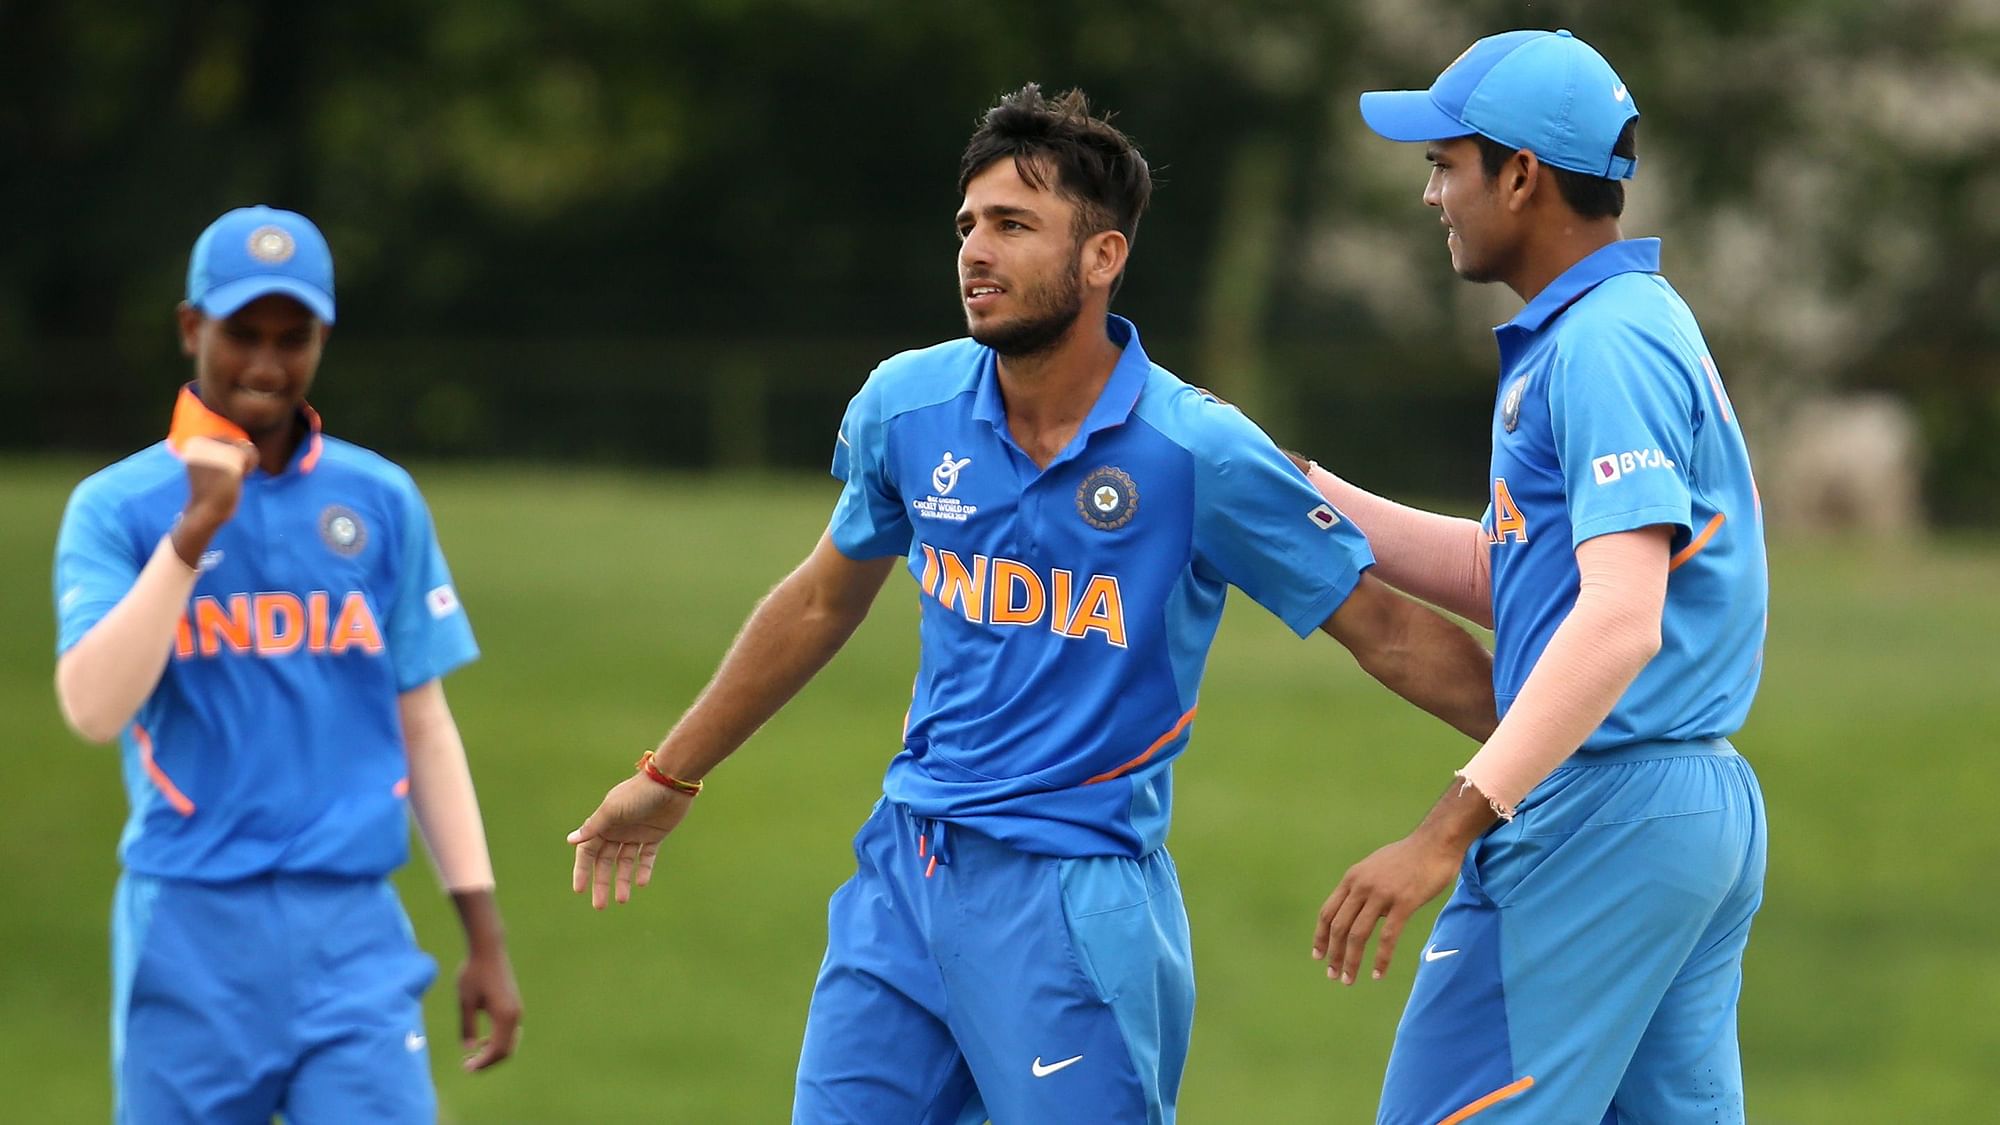 Leg-spinner Ravi Bishnoi and opener Yashasvi jaiswal finished the U-19 World Cup as the highest wicket taker and the highest run-scorer respectively.